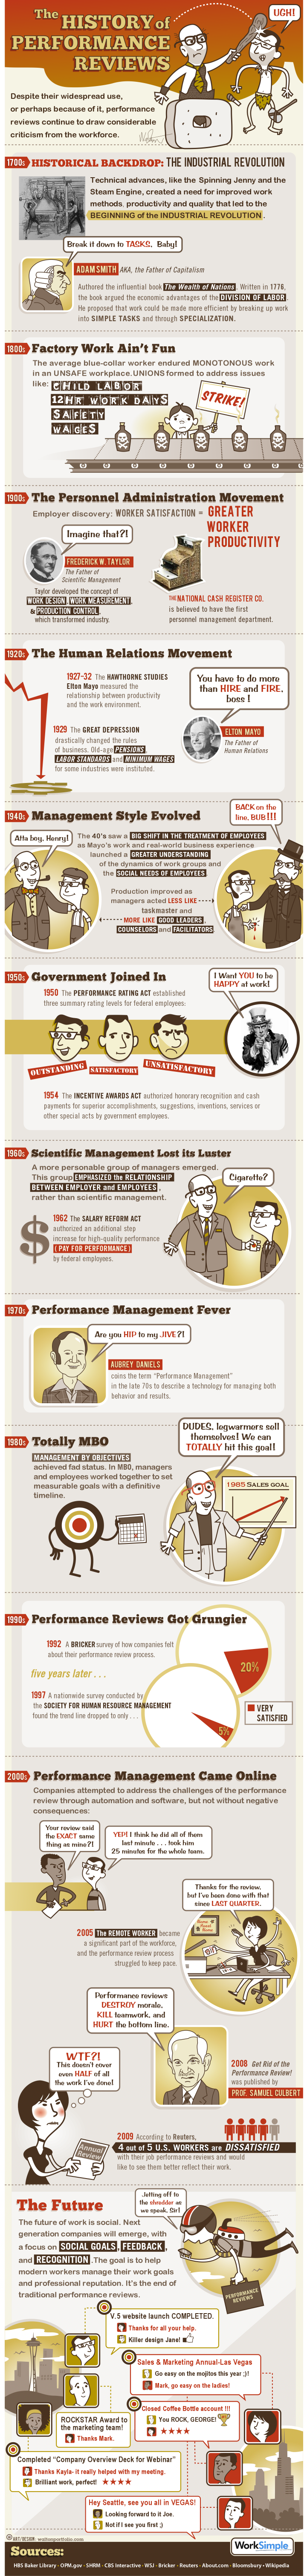 The Past, Present, & Future of Performance Reviews (Infographic)